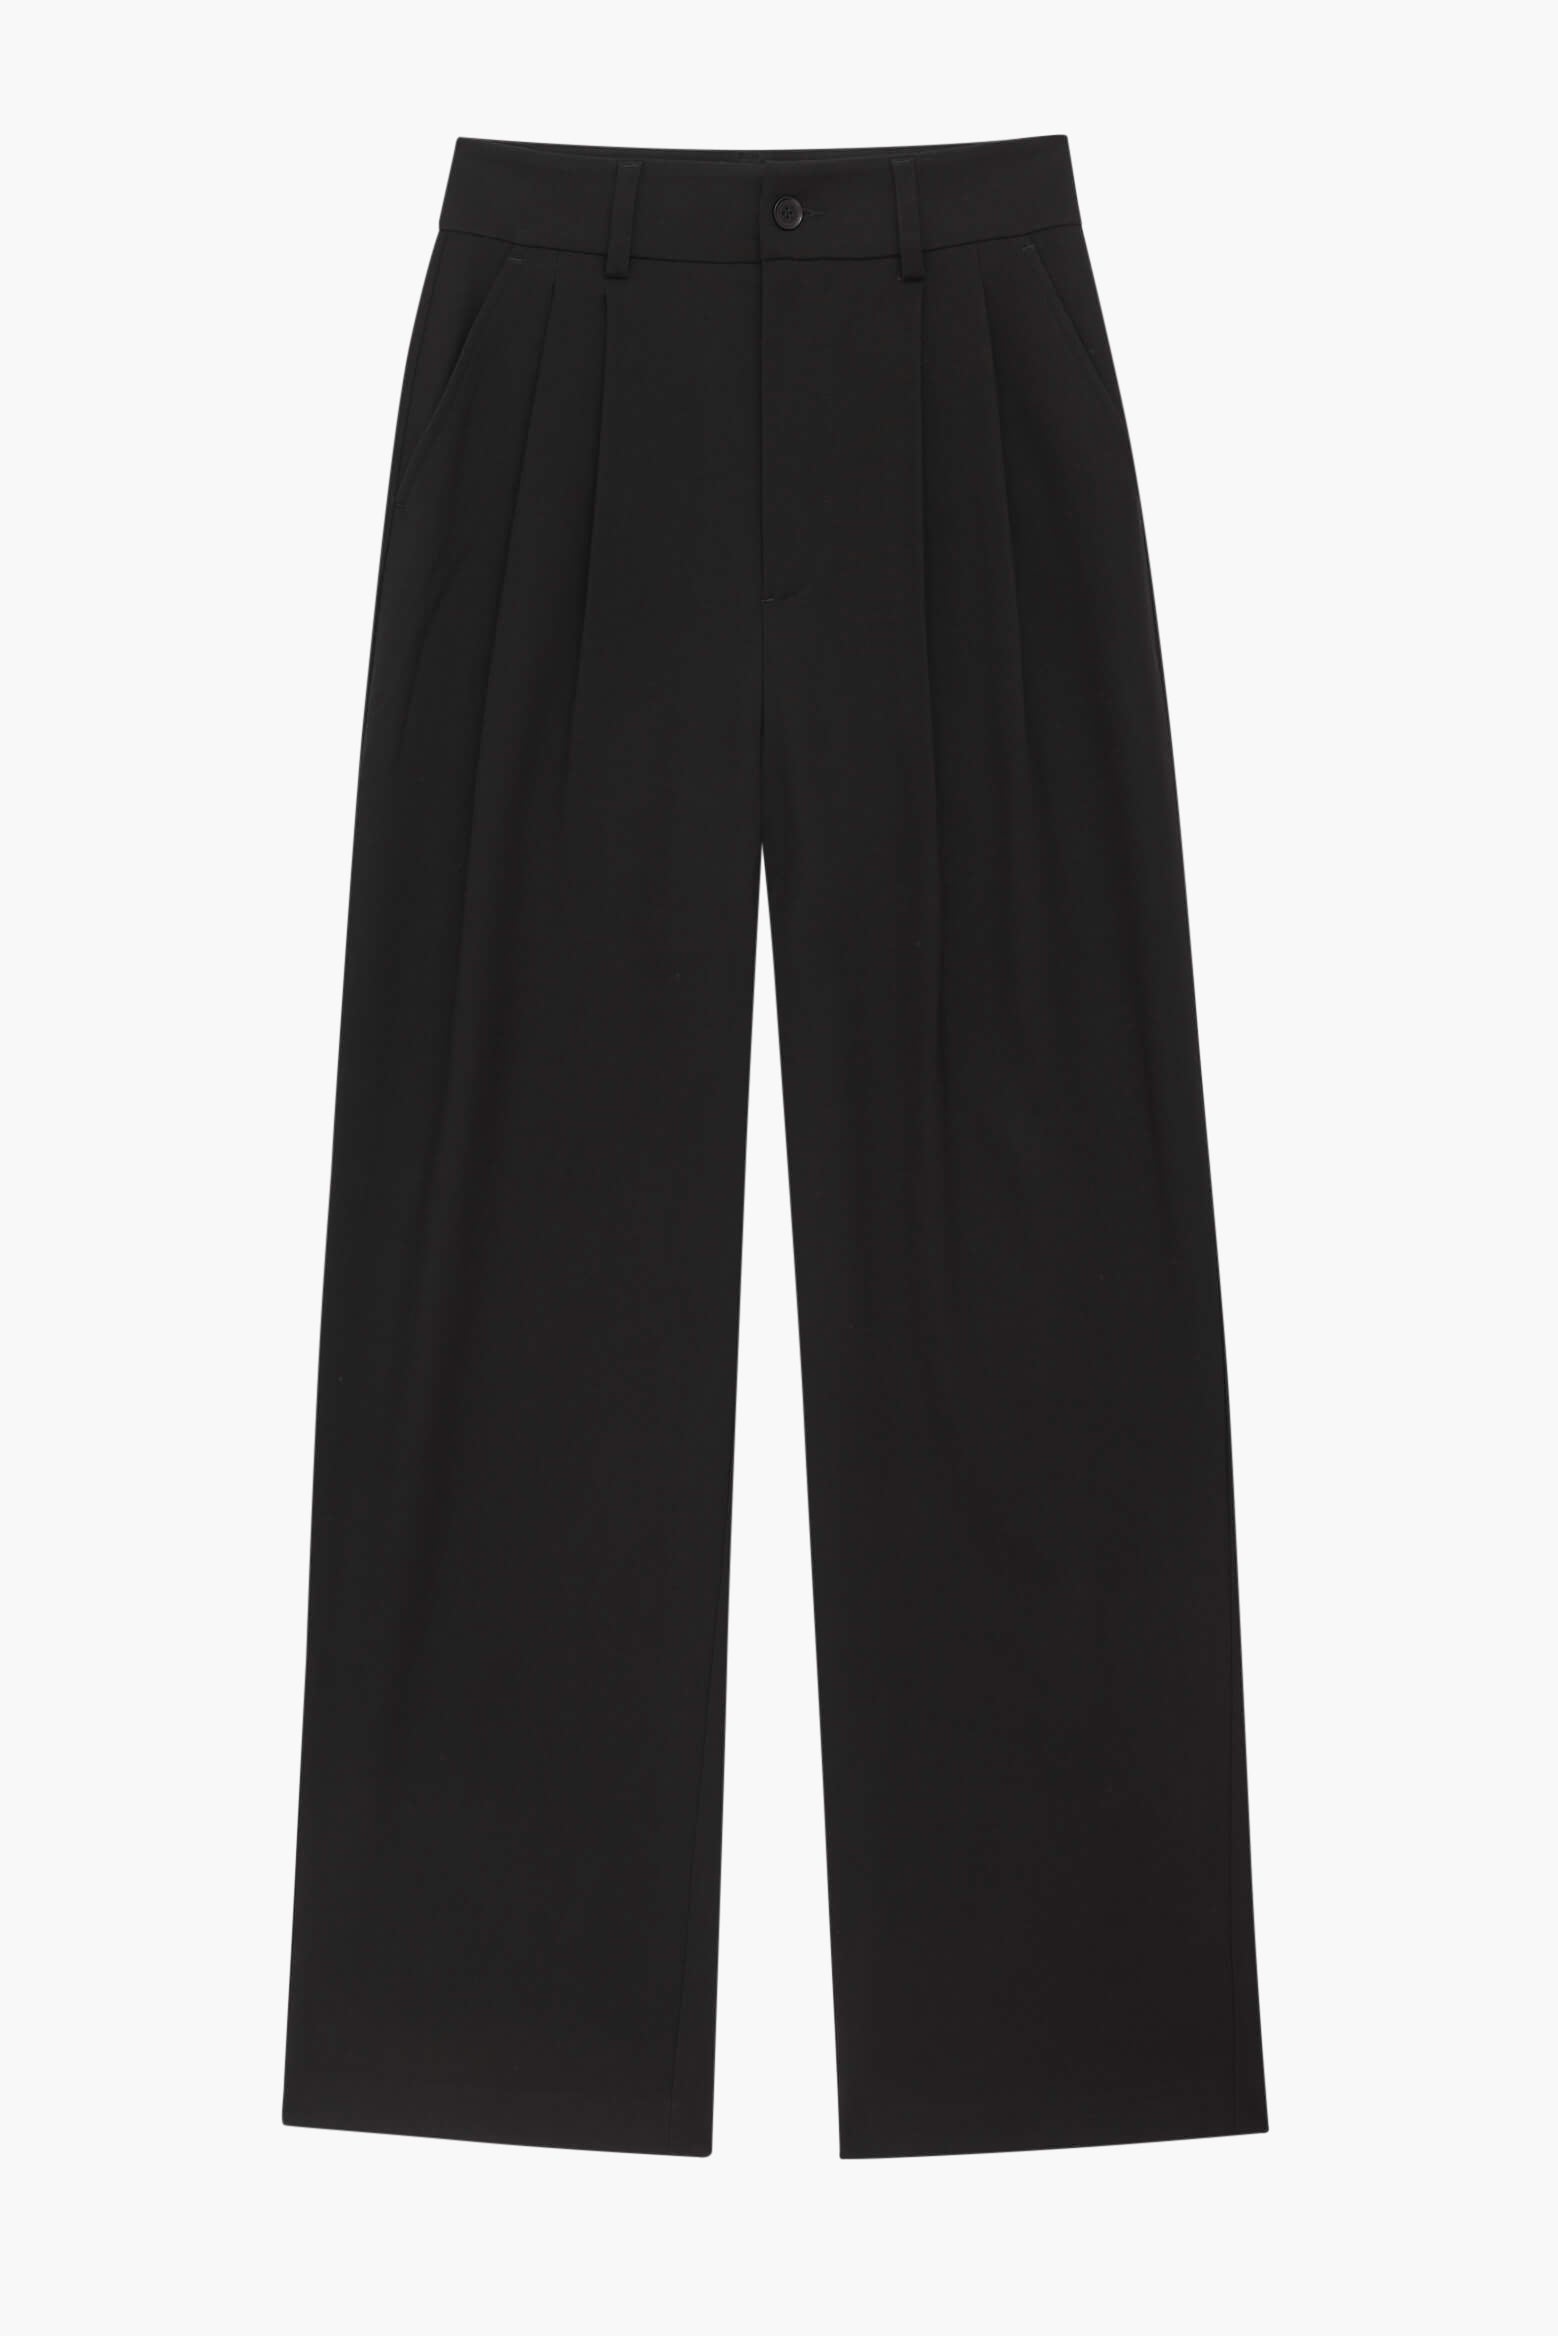 Anine Bing Carrie Twill Pant in Black available at The New Trend